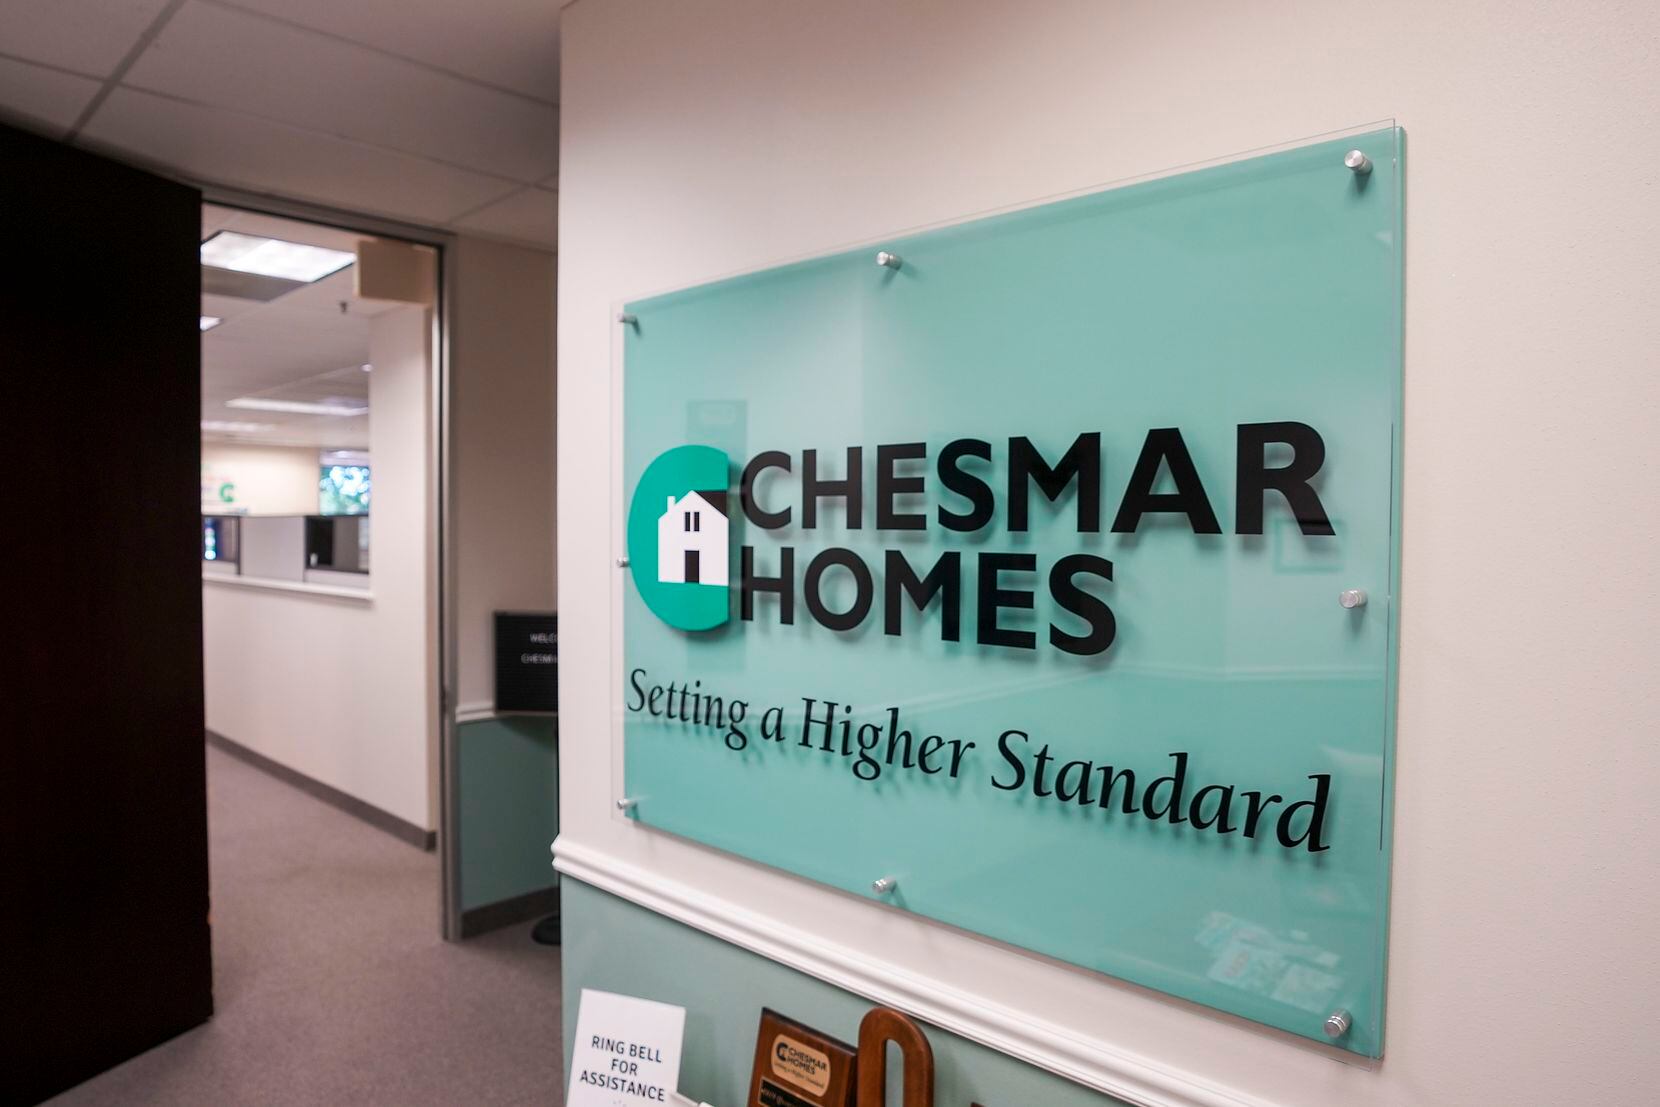 Offices of Chesmar Homes in Richardson.